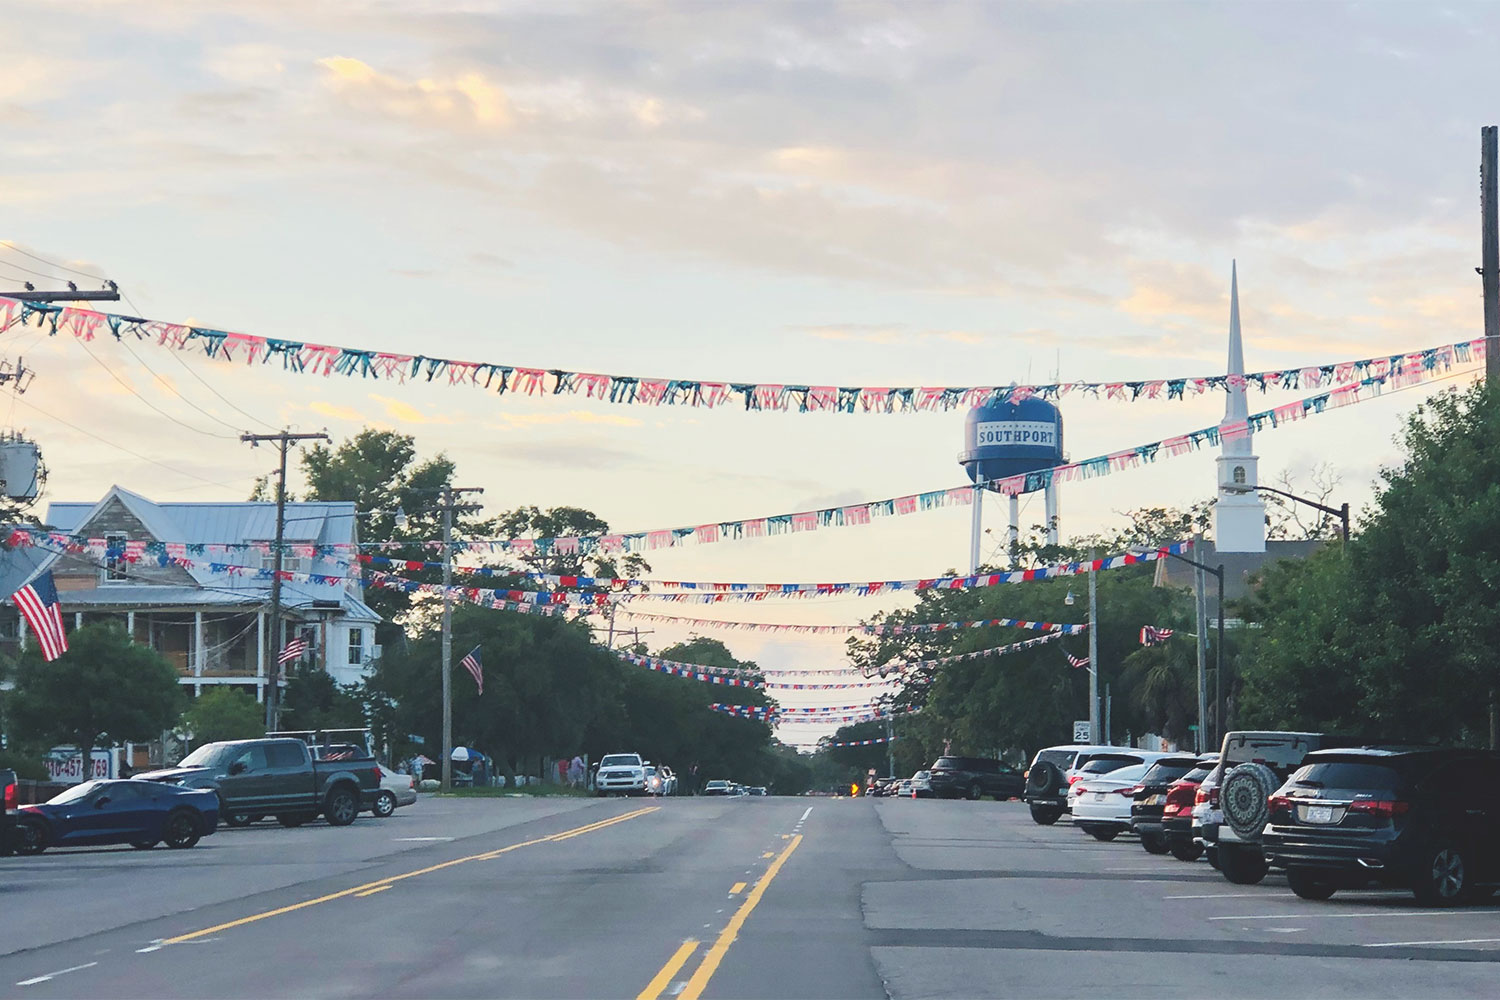 Southport, NC town decorated for the fourth of july.